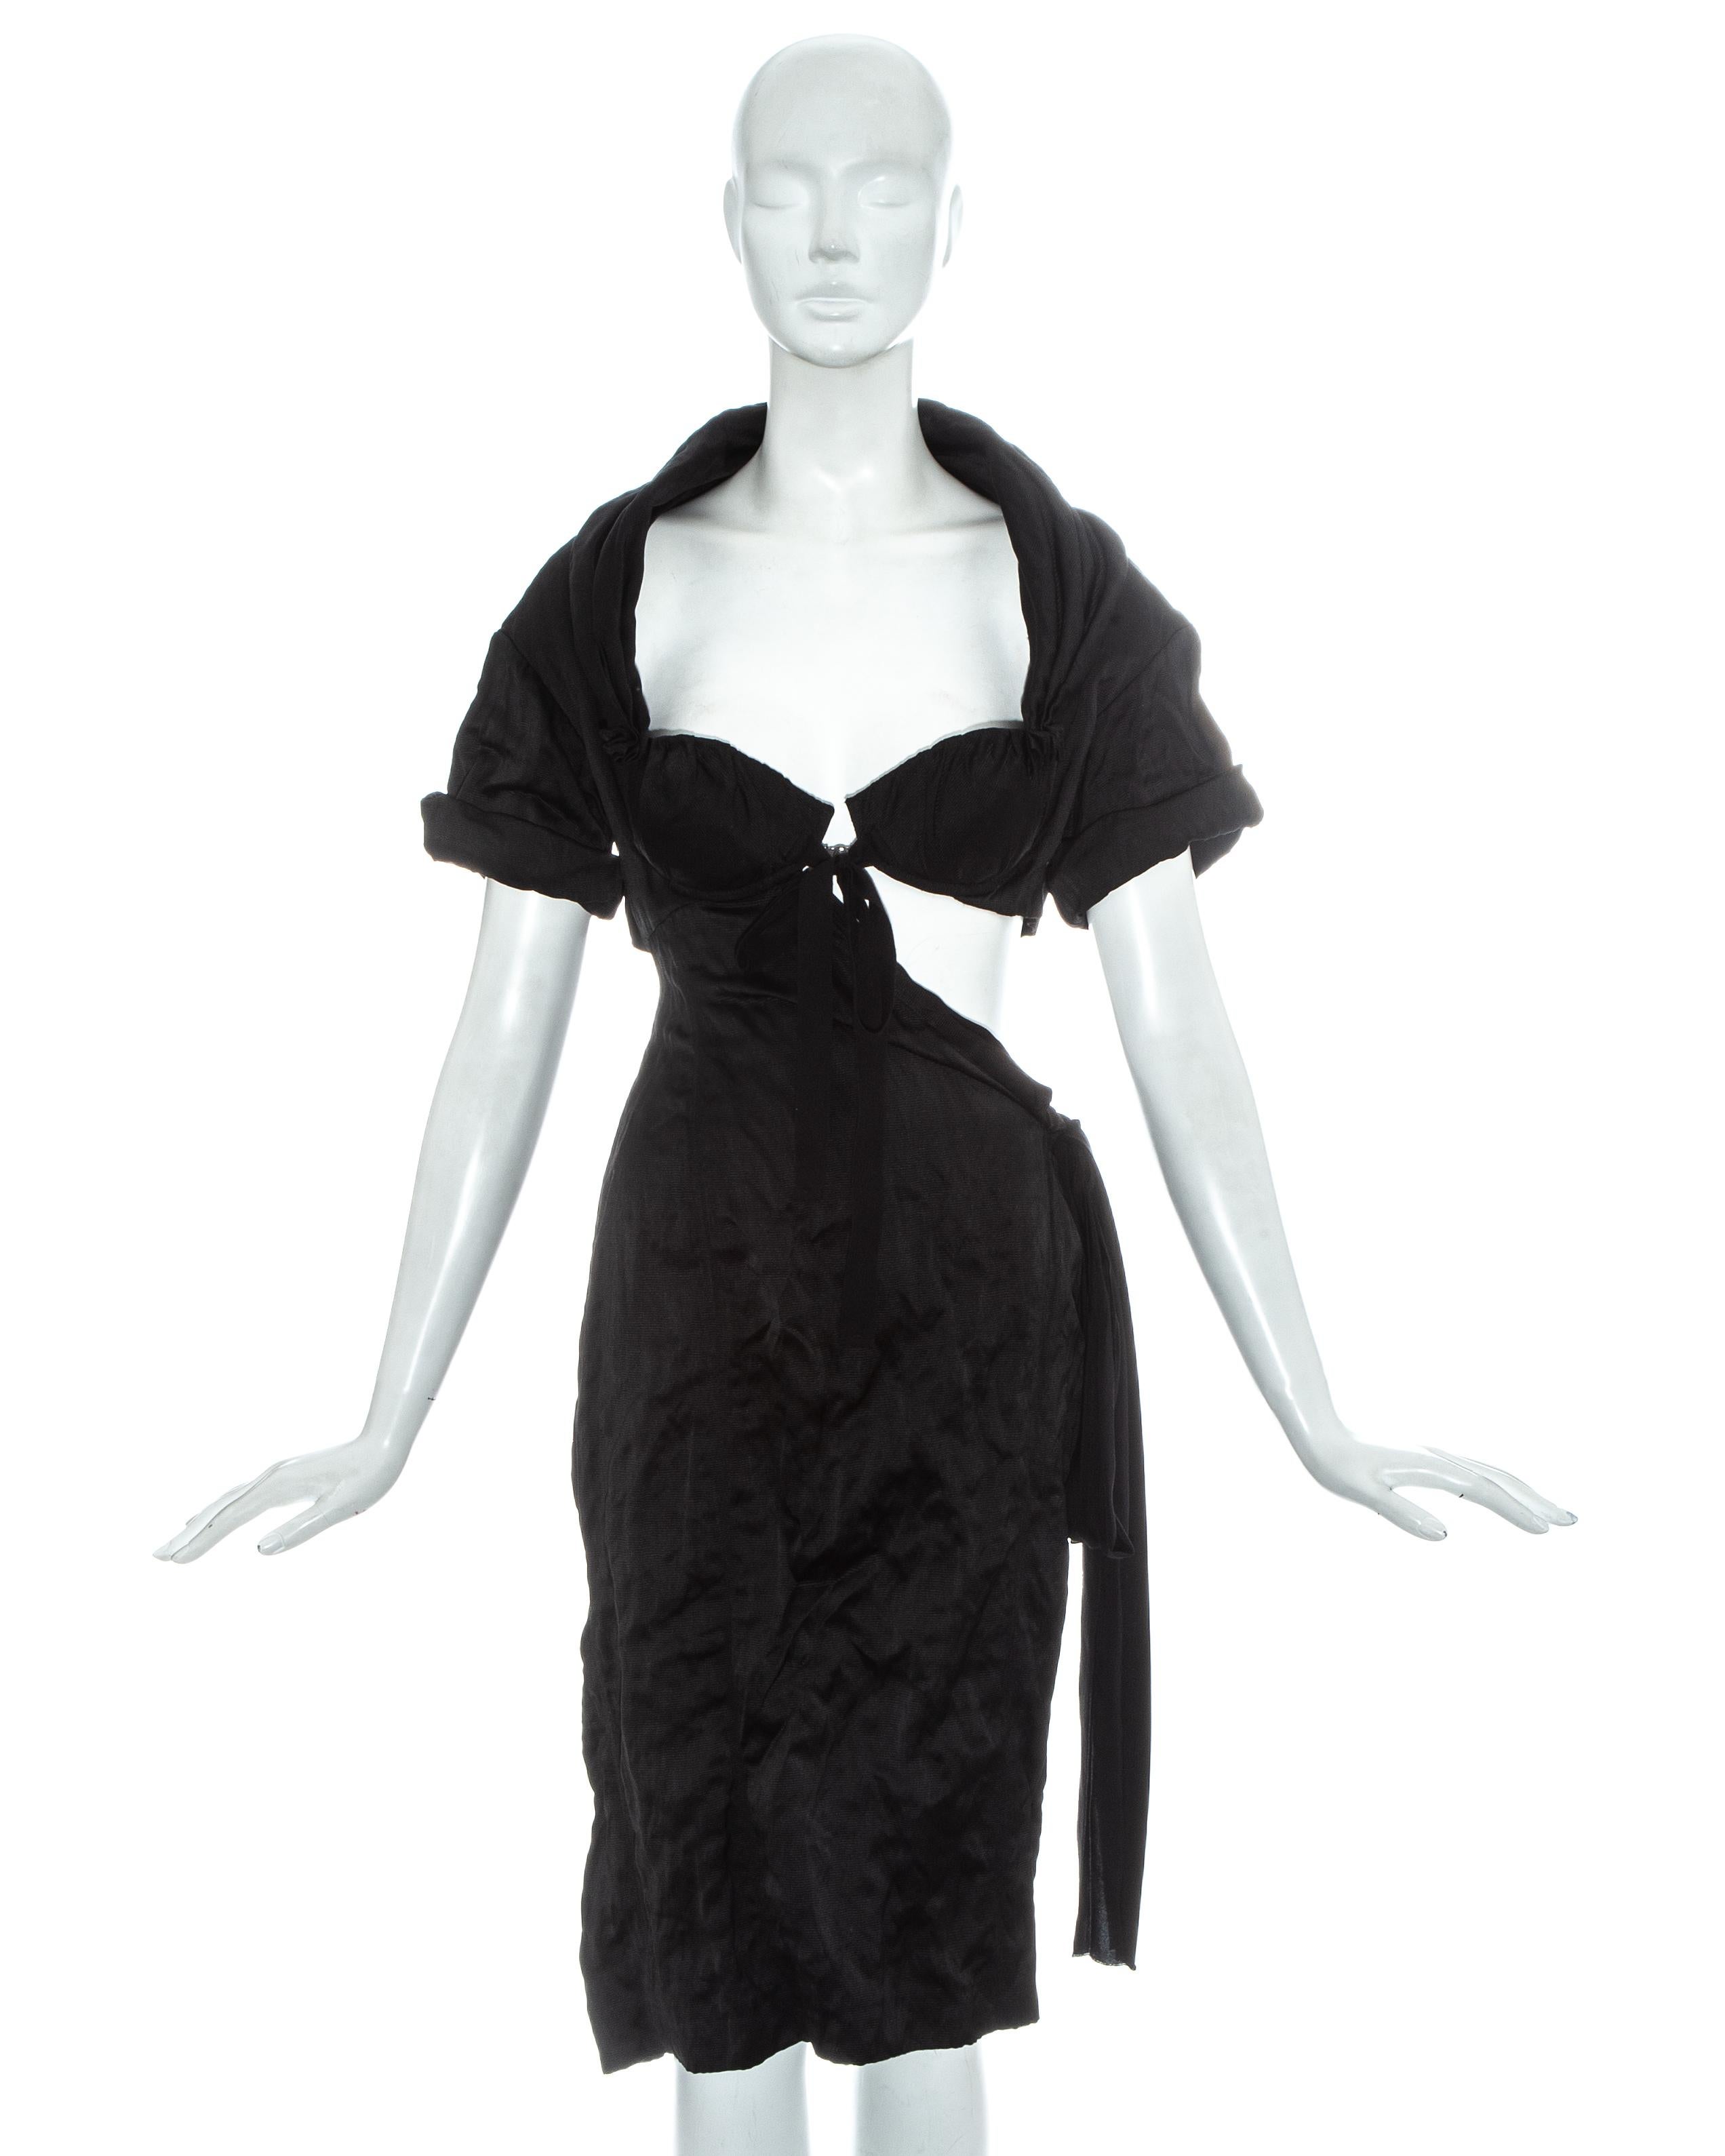 Prada black crinkled evening dress with cut out on hip, drawstring waistband, ribbon fastenings and built in bra.

Spring-Summer 2009